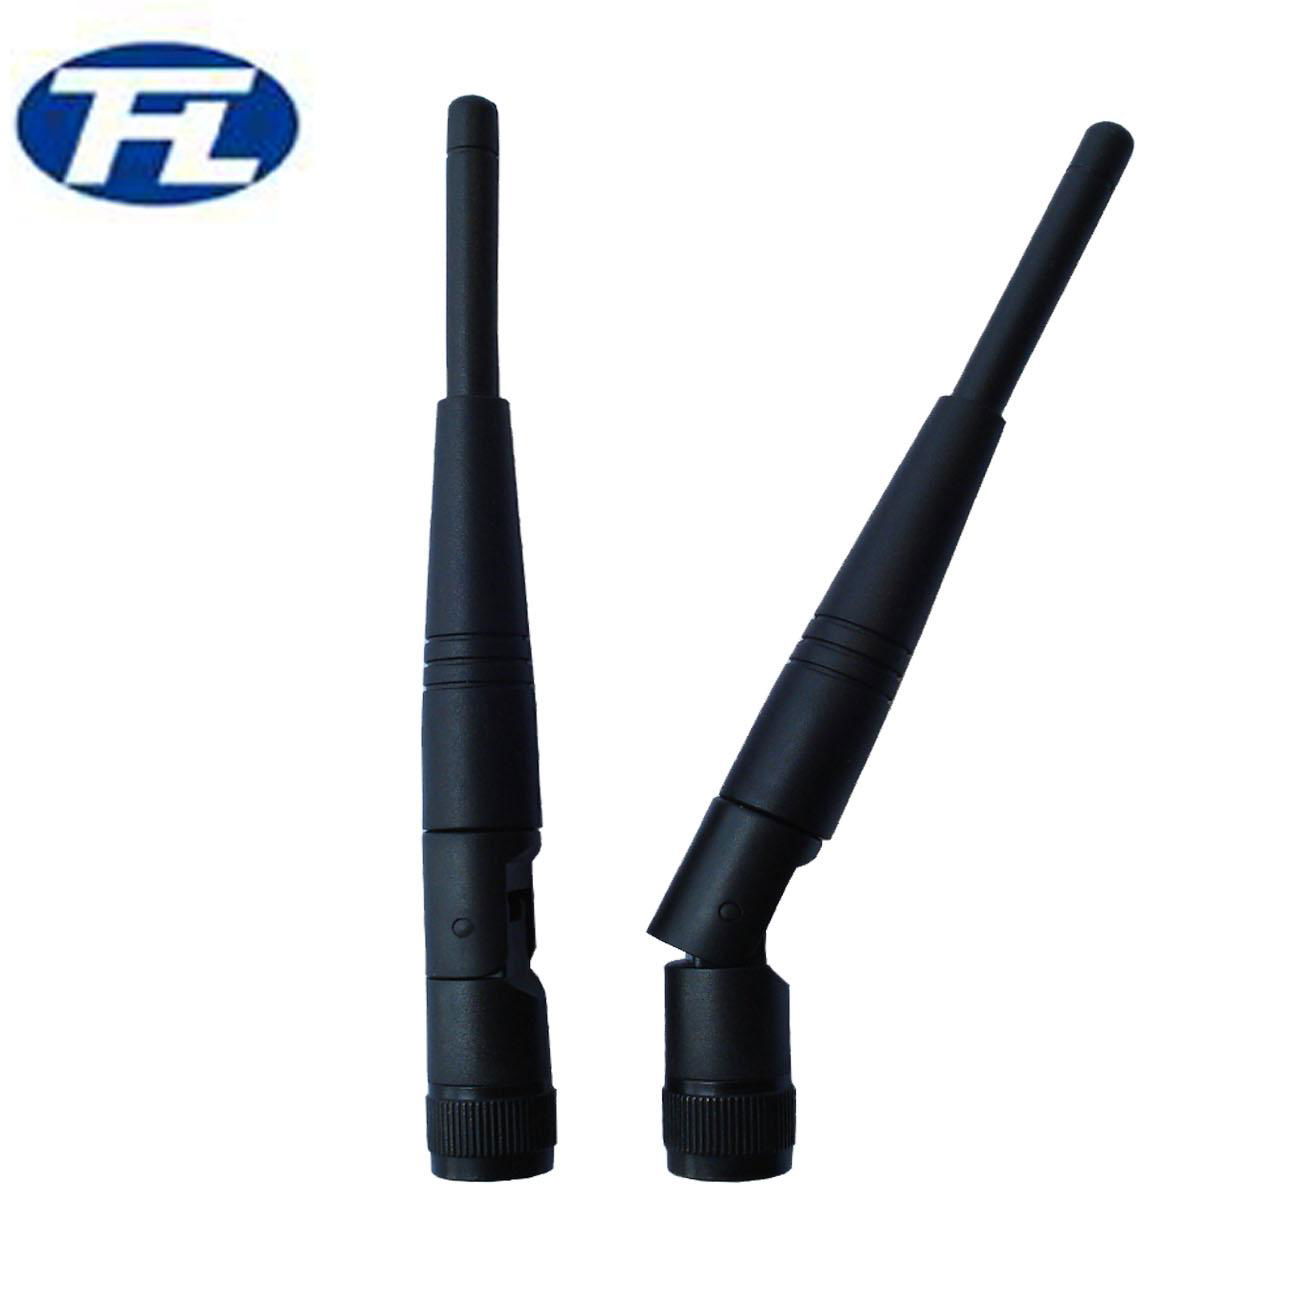 2.4g wifi antenna OMNI with SMA connector